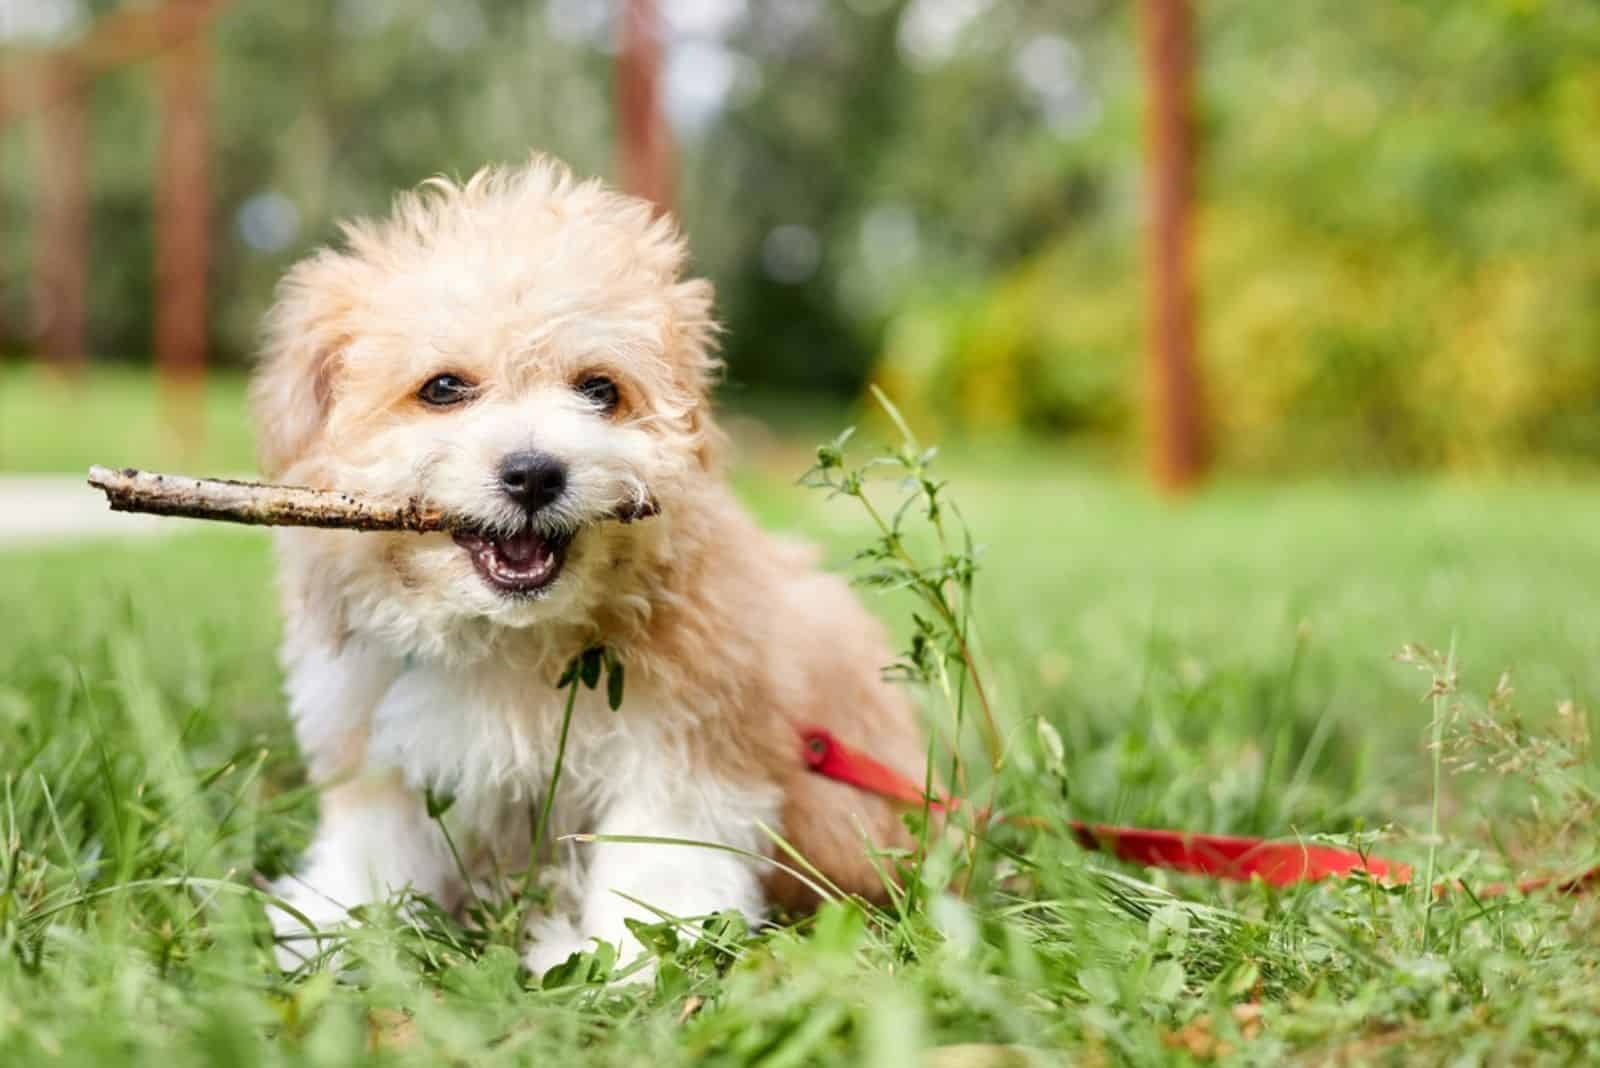 Little Maltipoo puppy holding a stick in his teeth